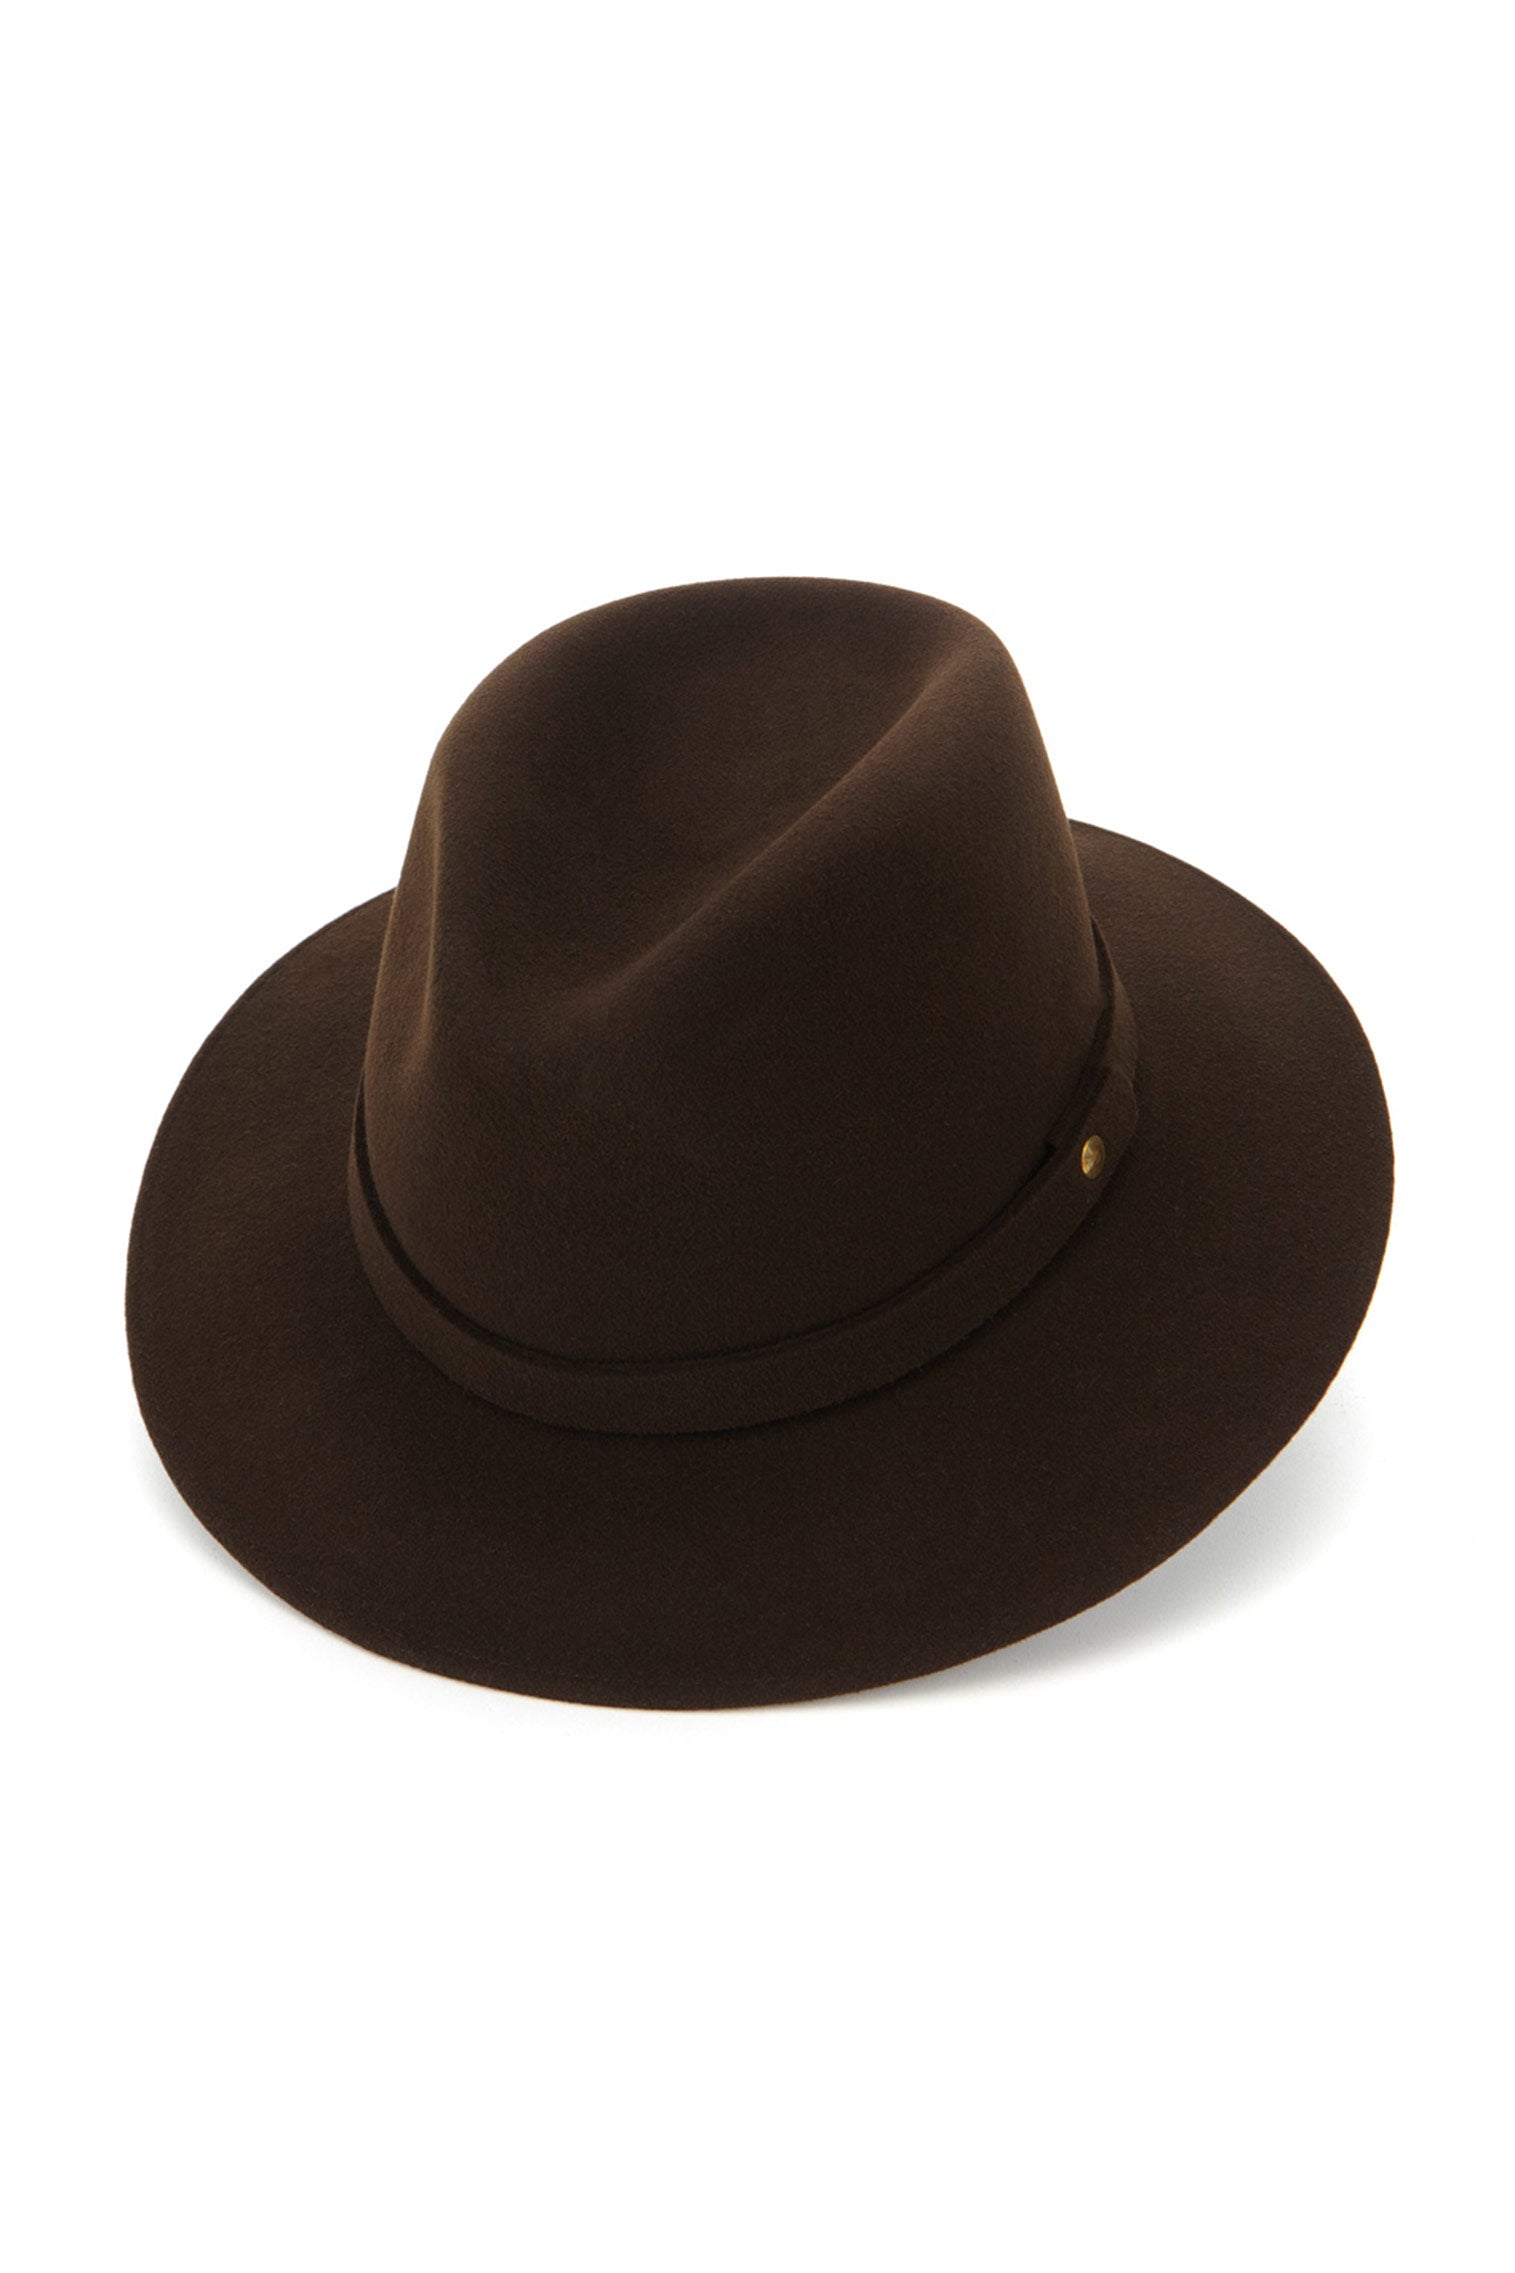 Nomad Rollable Trilby - Products - Lock & Co. Hatters London UK